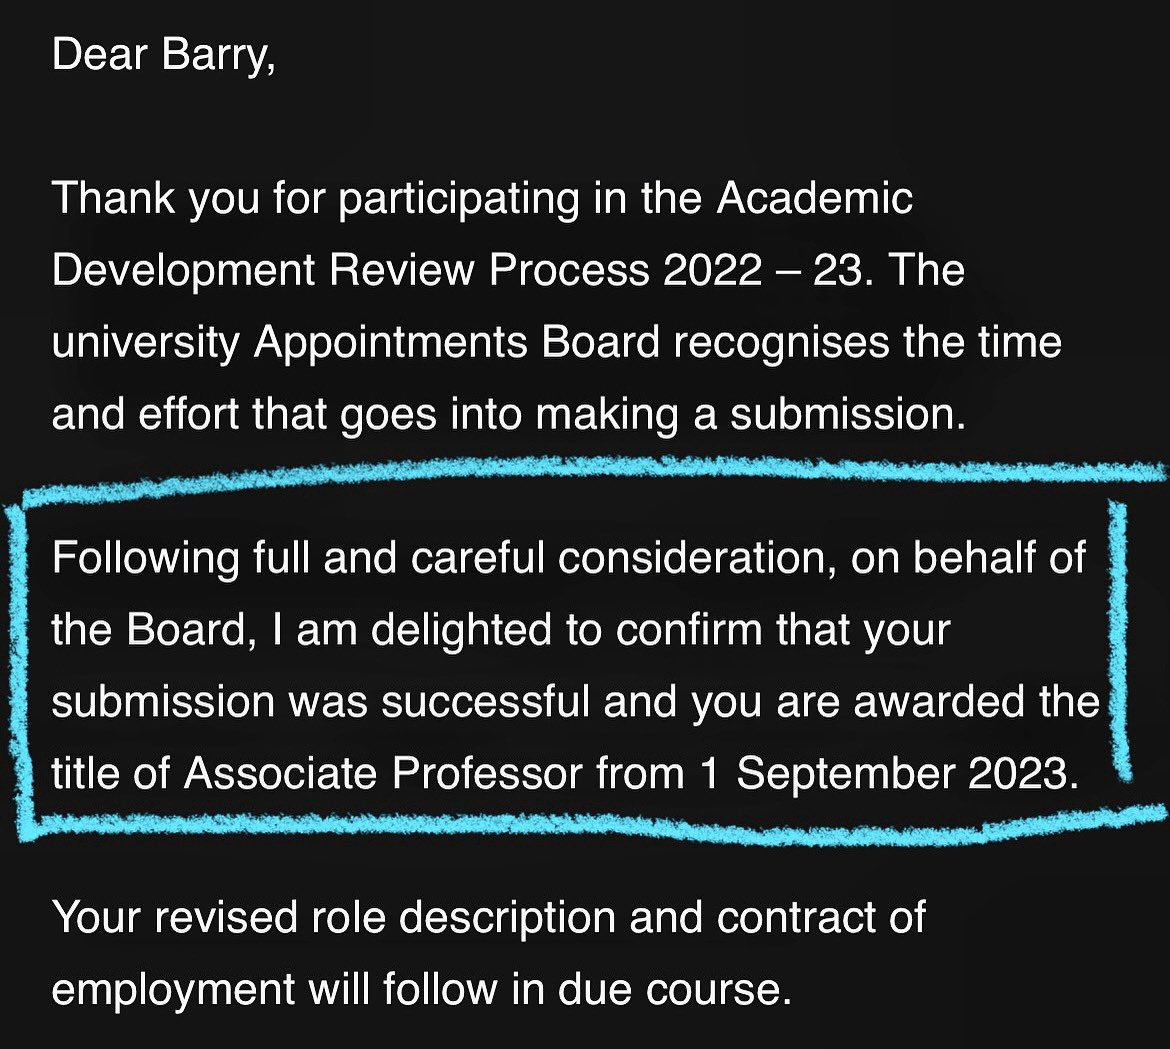 🎉 Just celebrating this HUGE moment! 🎊 So much persistence, dedication, bids, projects, publications, citizenship, and sheer hard work on top of the day job has gone into getting this promotion. #AssociateProfessor #ThankYou 🎉 🎊 🎉 🎈 @NorthumbriaUni